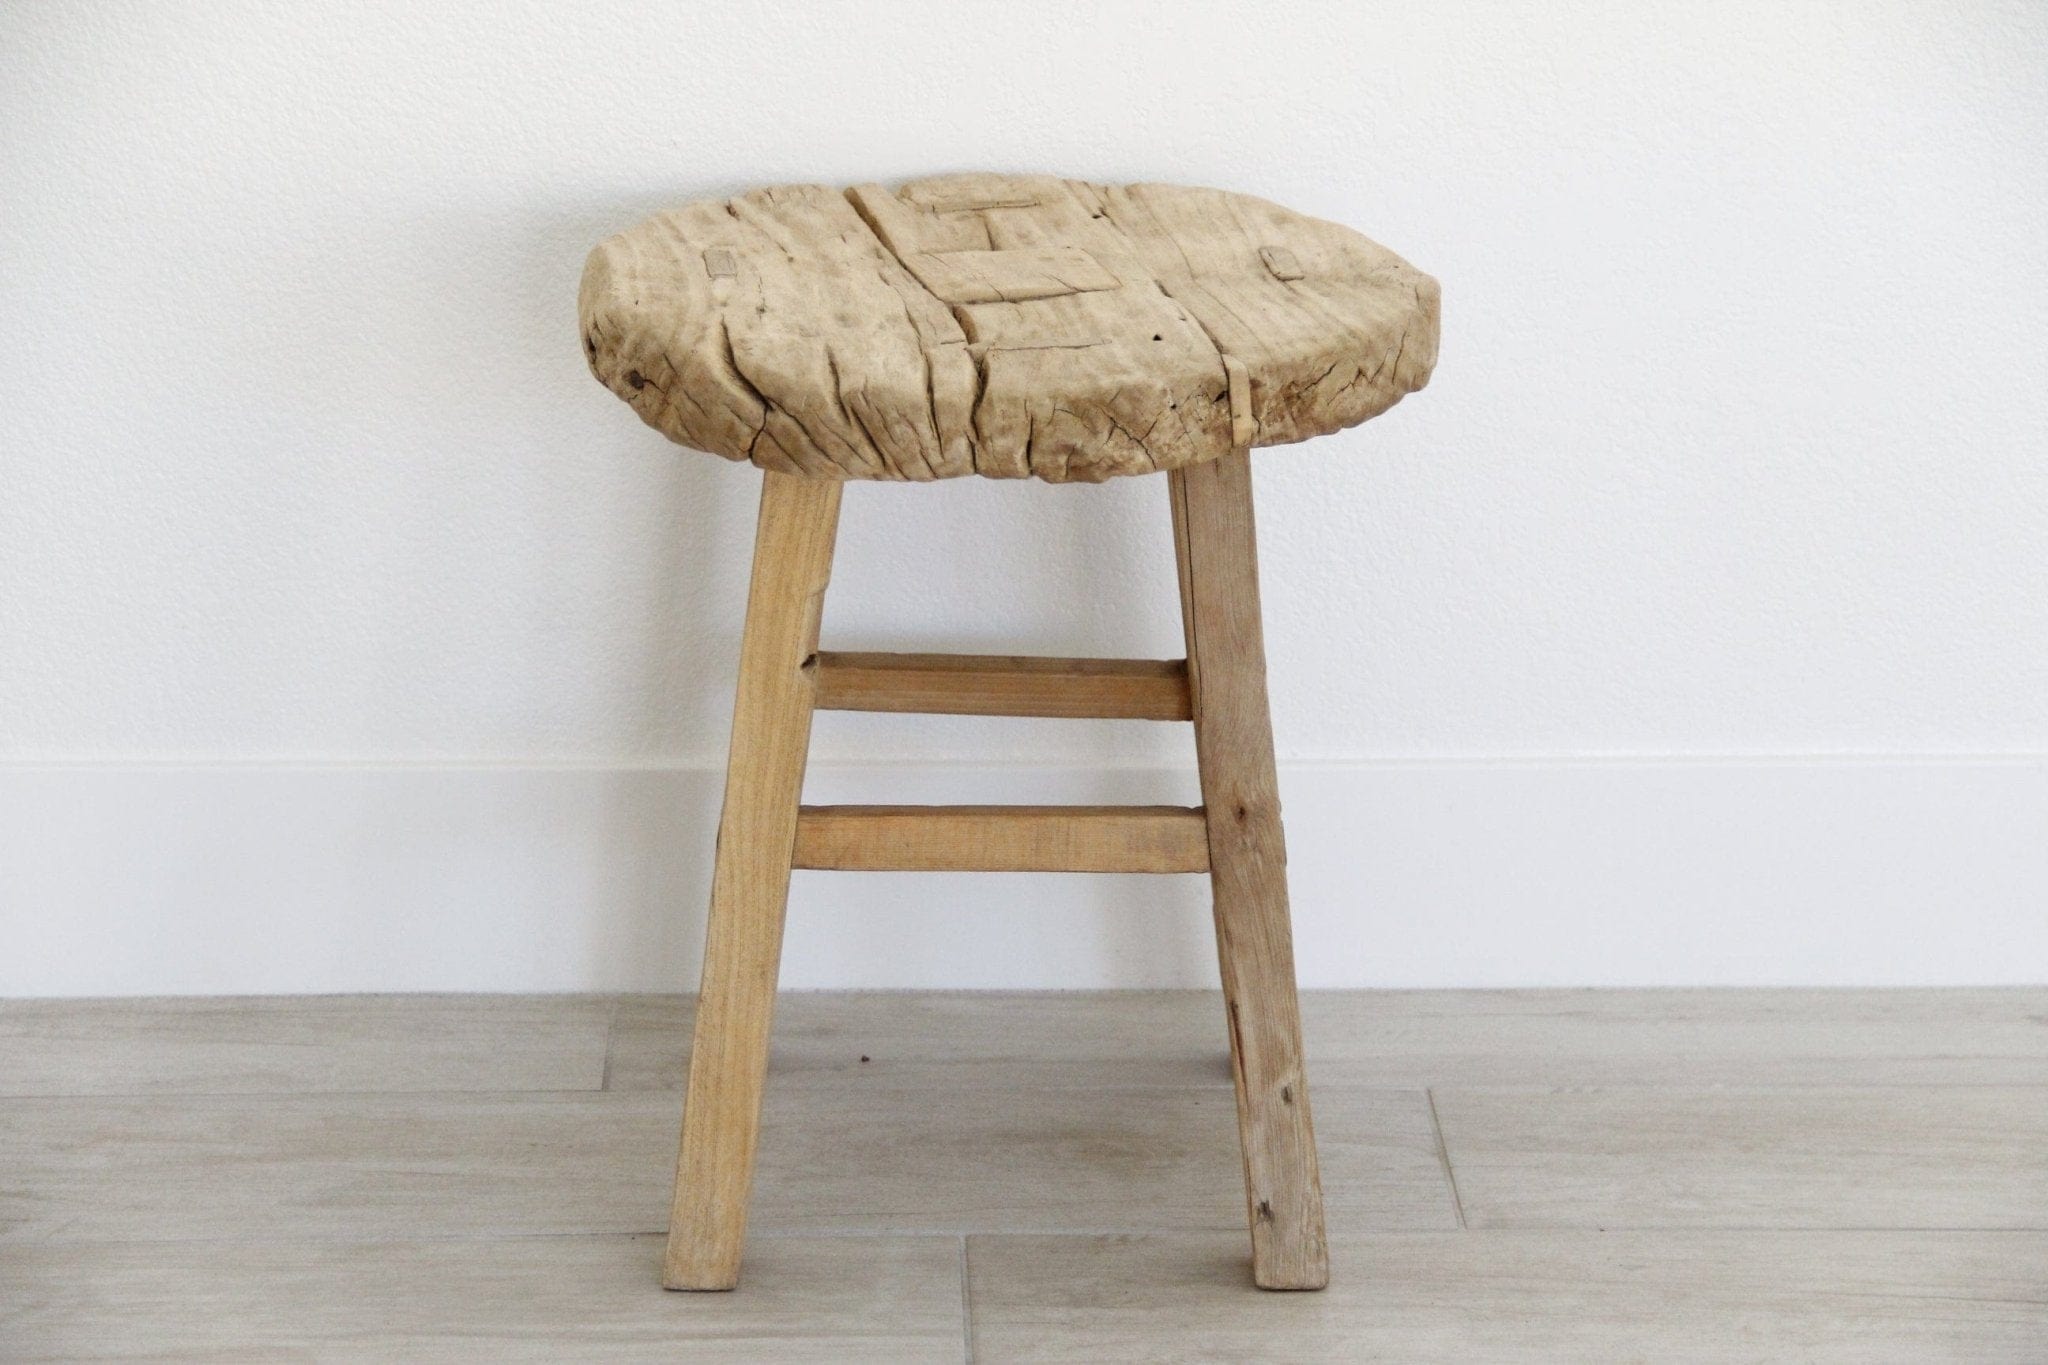 Vintage Elm Round Table | Coffee or Side Table | SHIPS FREE - Debra Hall Lifestyle